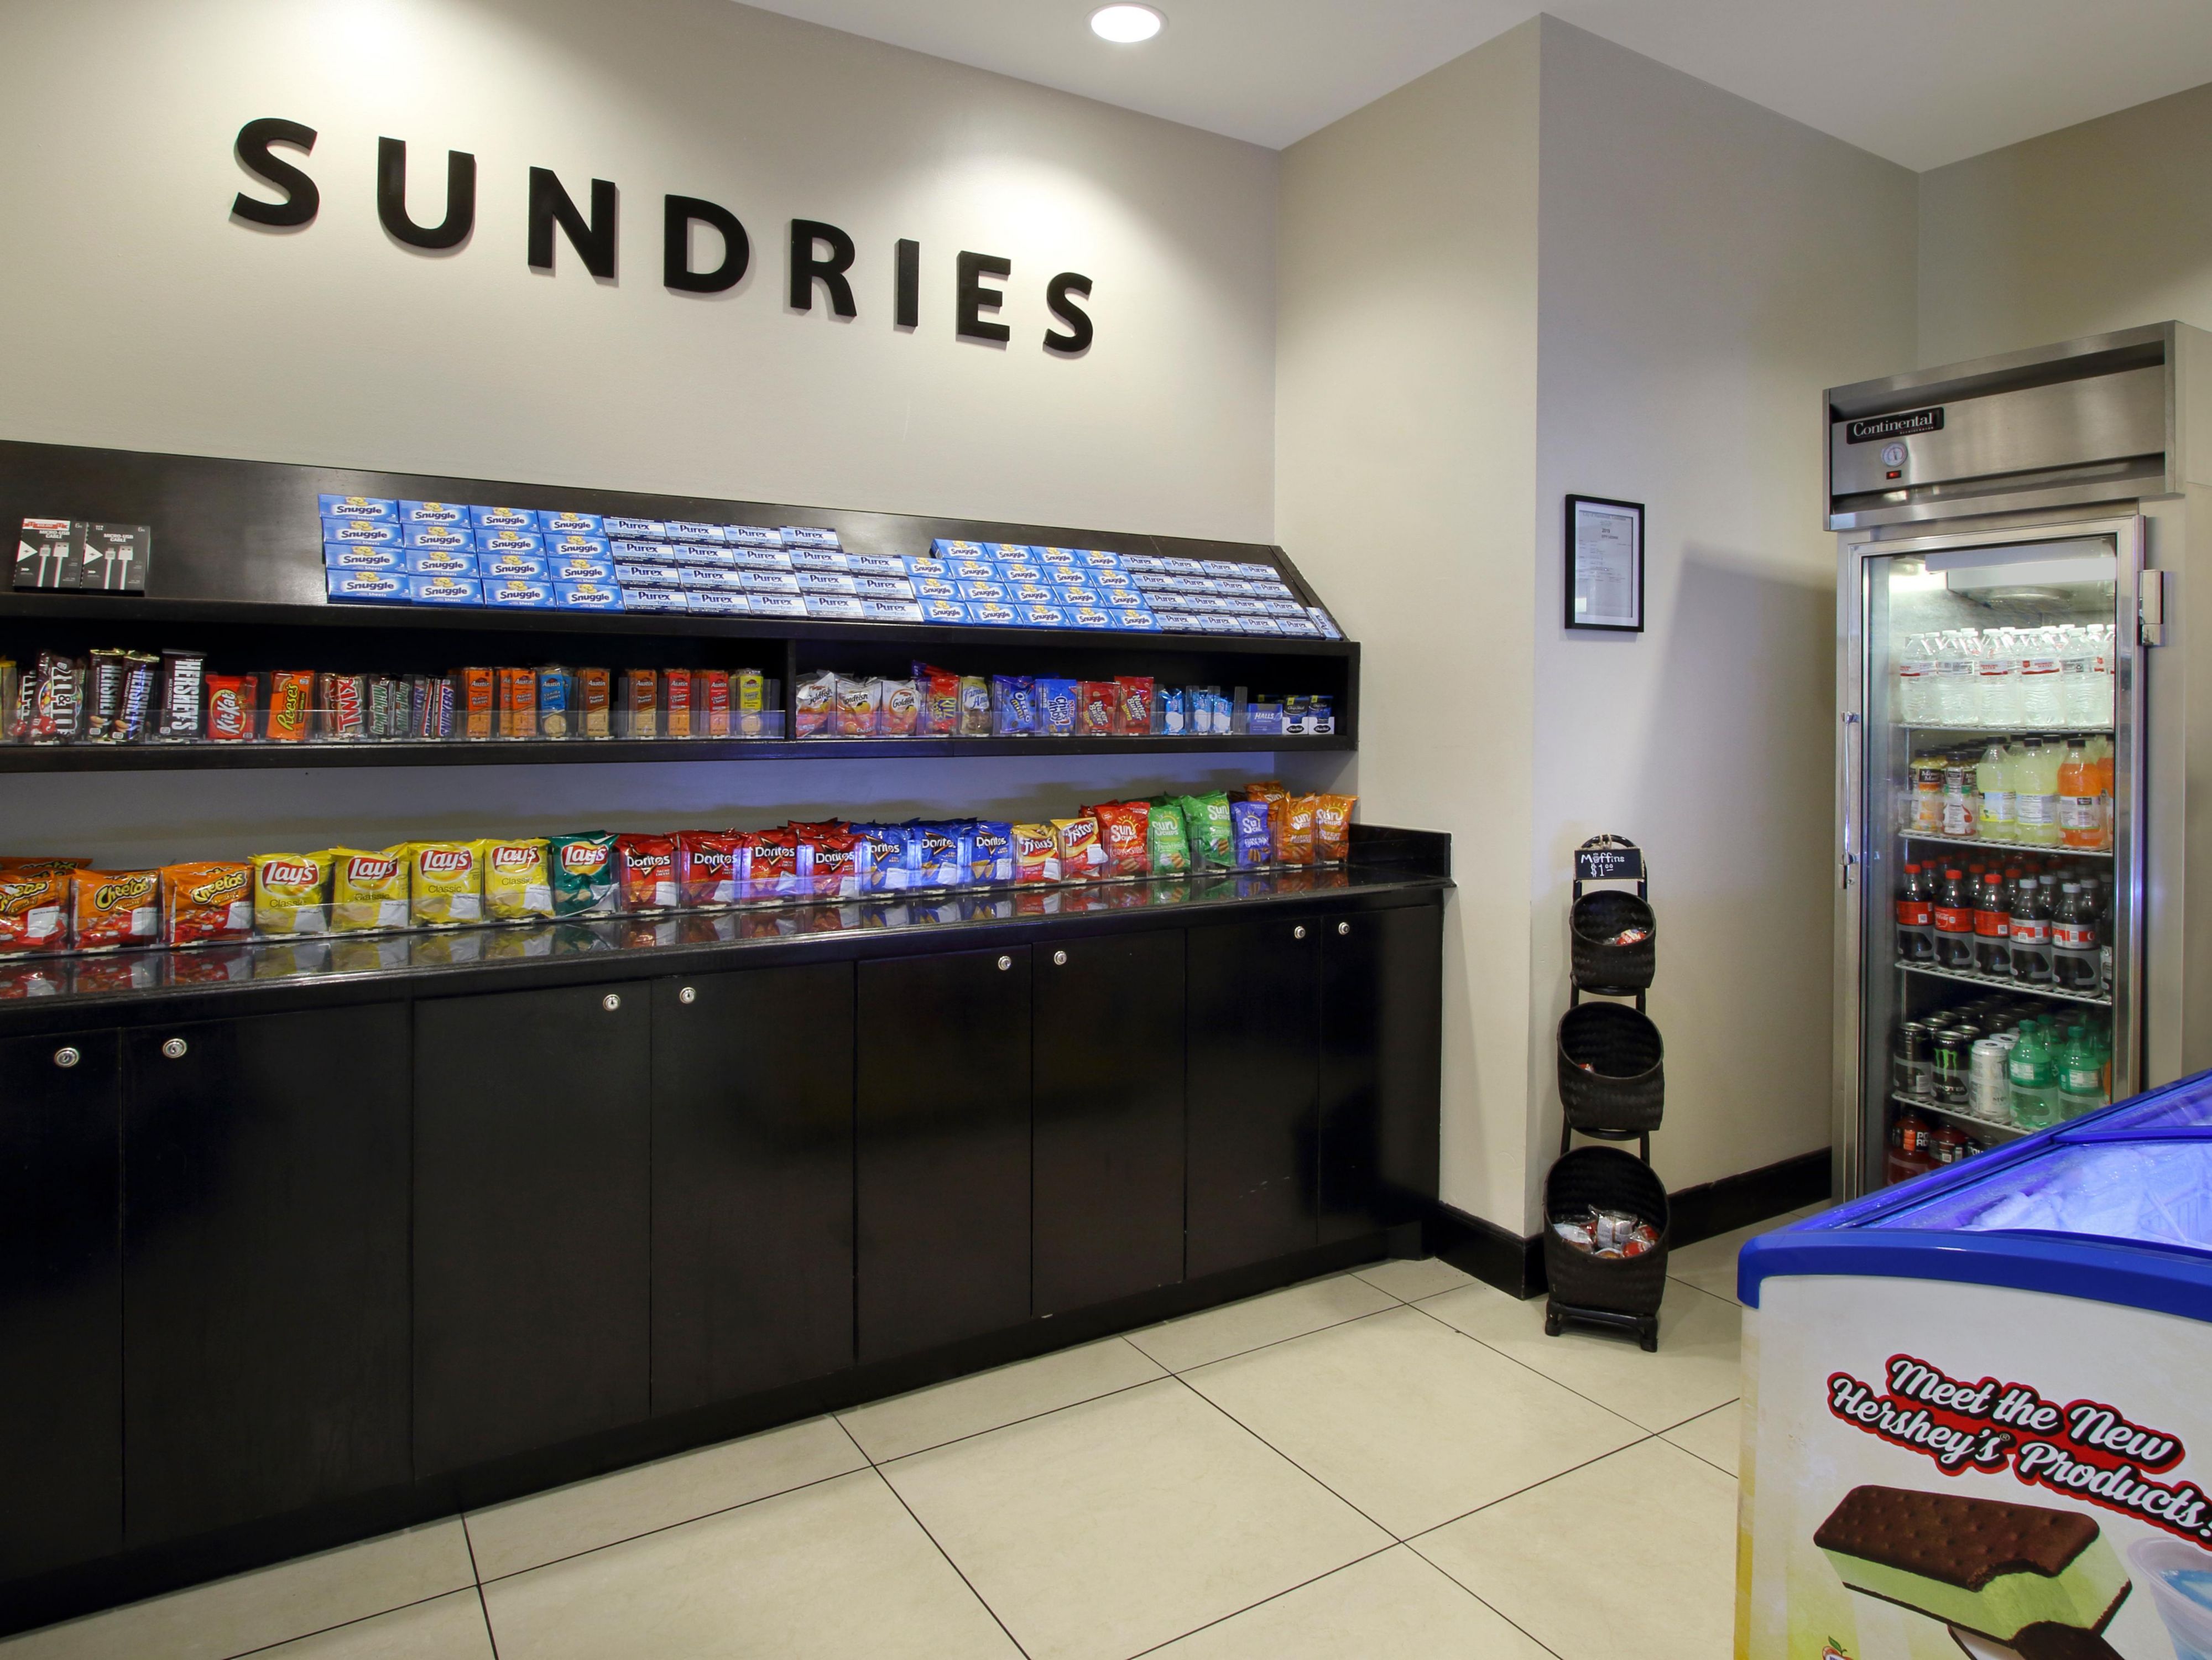 Our Sundries shop offers a variety of sweet and salty snacks, candy, sodas, bottled waters, and assorted ice cream treats.   Other items available for sale include medications, laundry detergent and fabric softener in case any of these items may have been forgotten during your stay.  